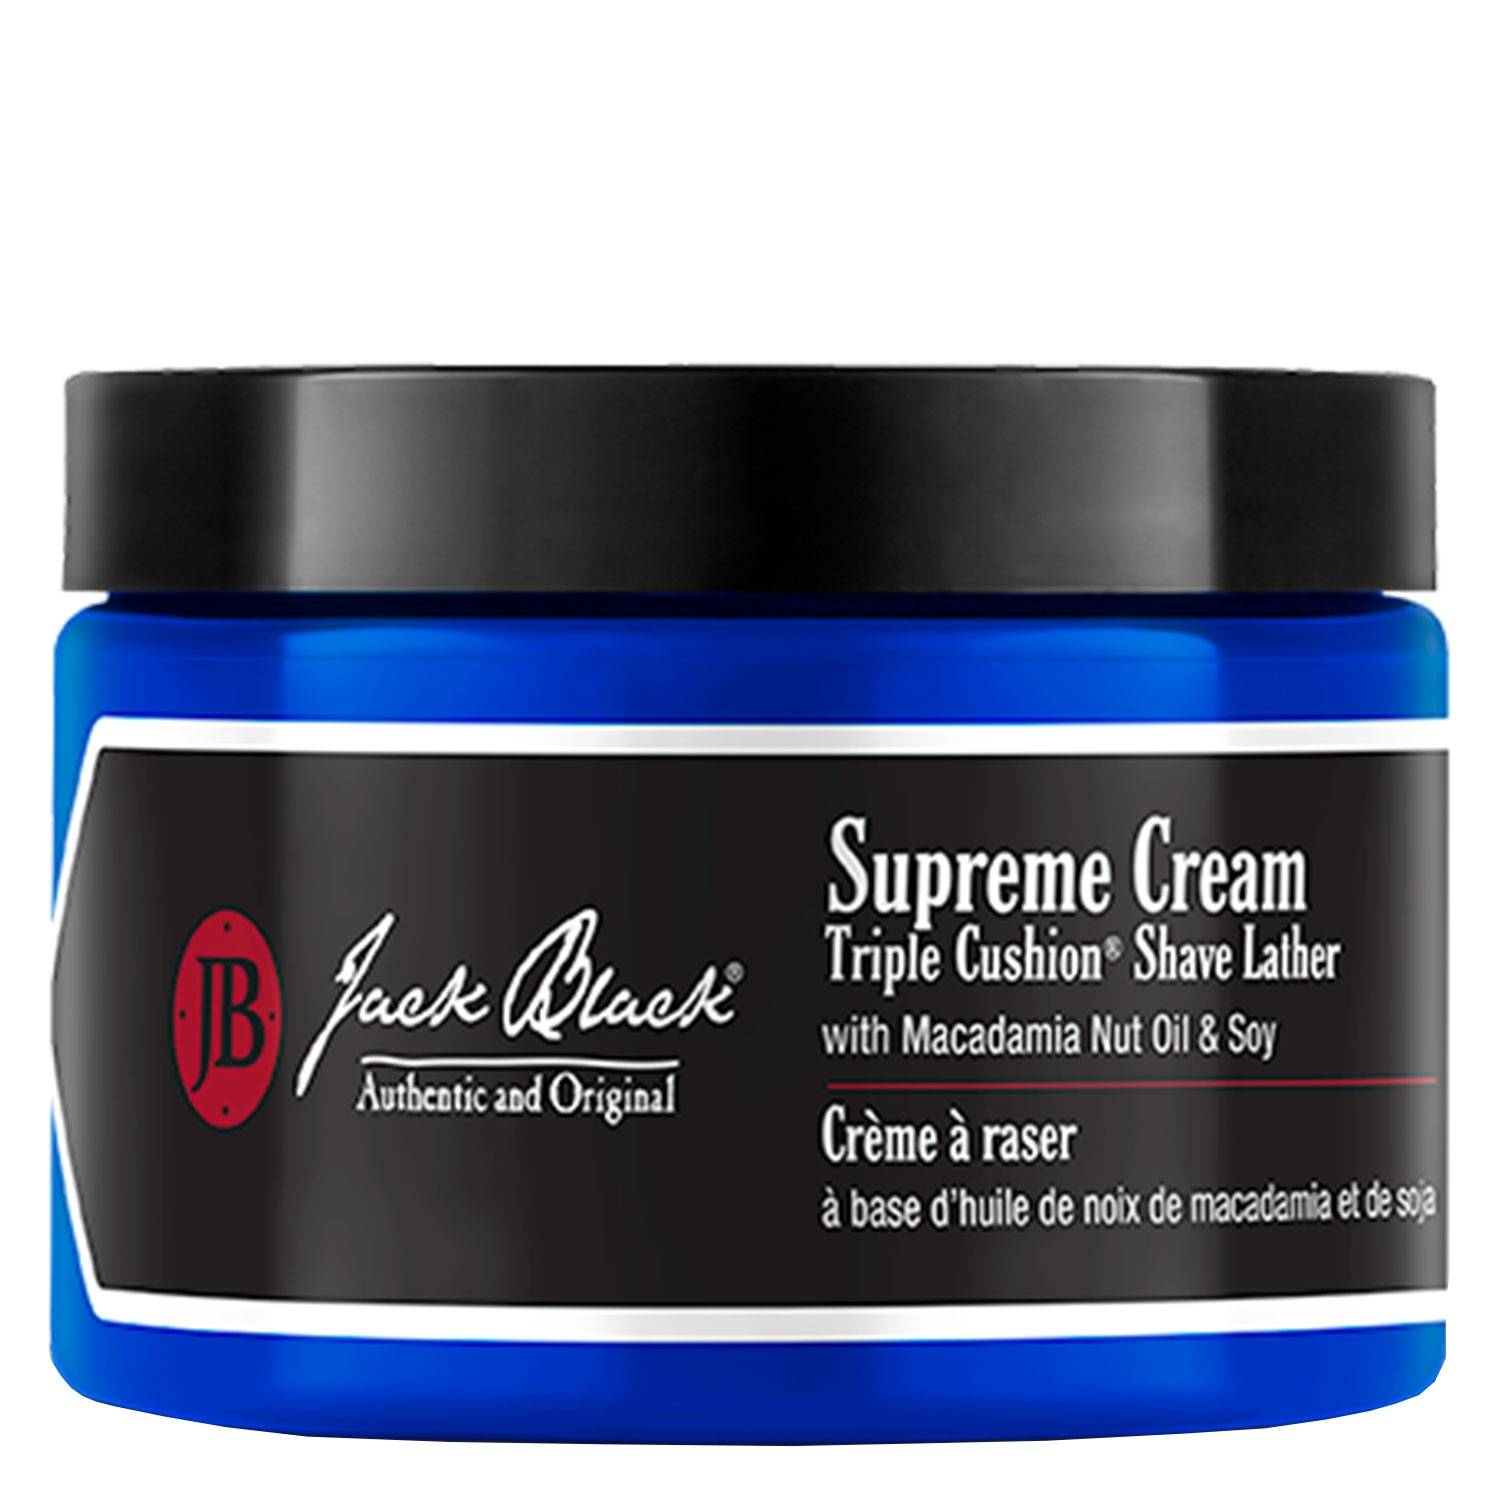 Product image from Jack Black - Supreme Cream Triple Cushion Shave